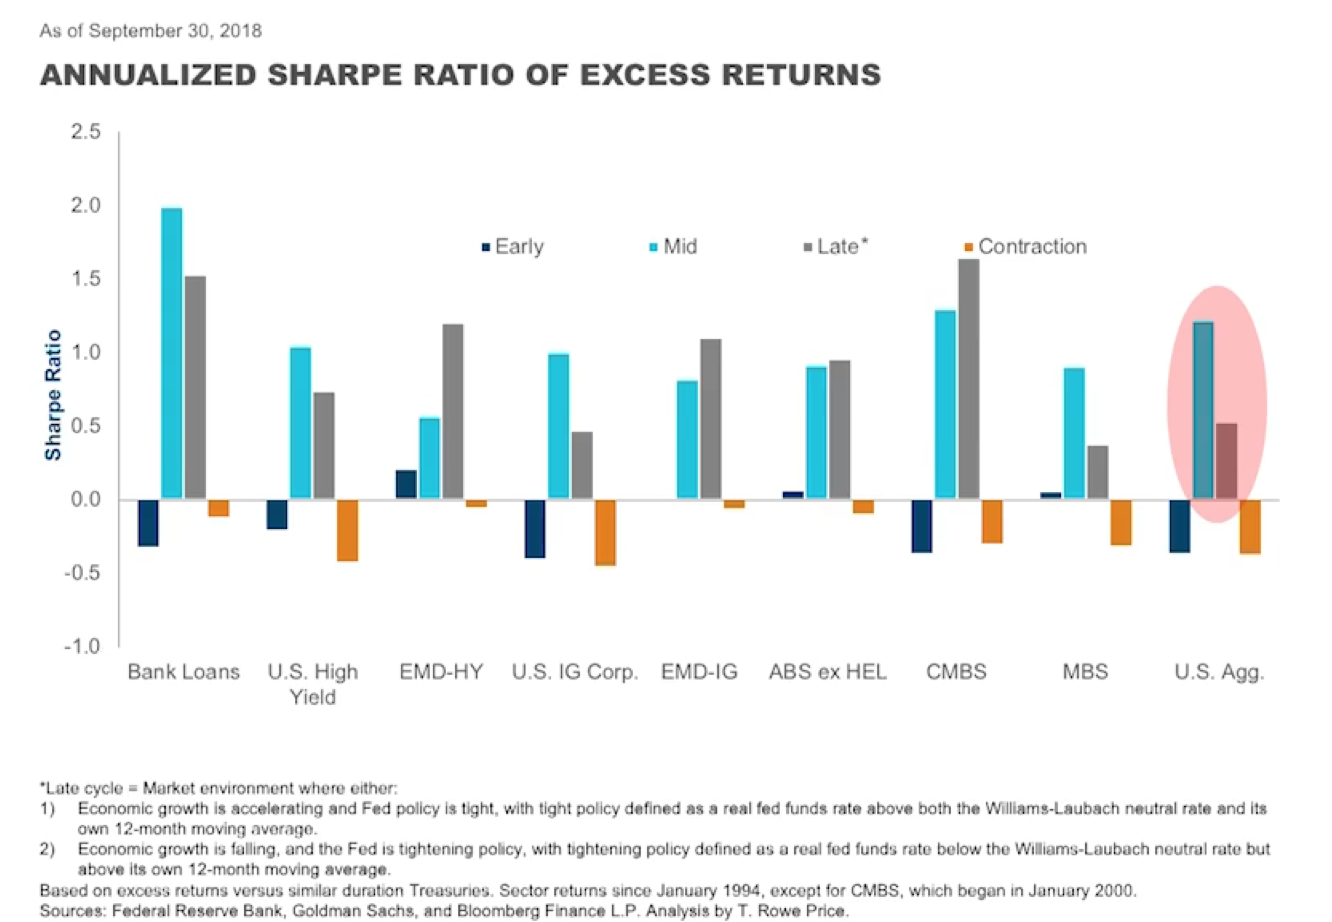 Annualzied Sharpe Ratio of Excess Returns.png